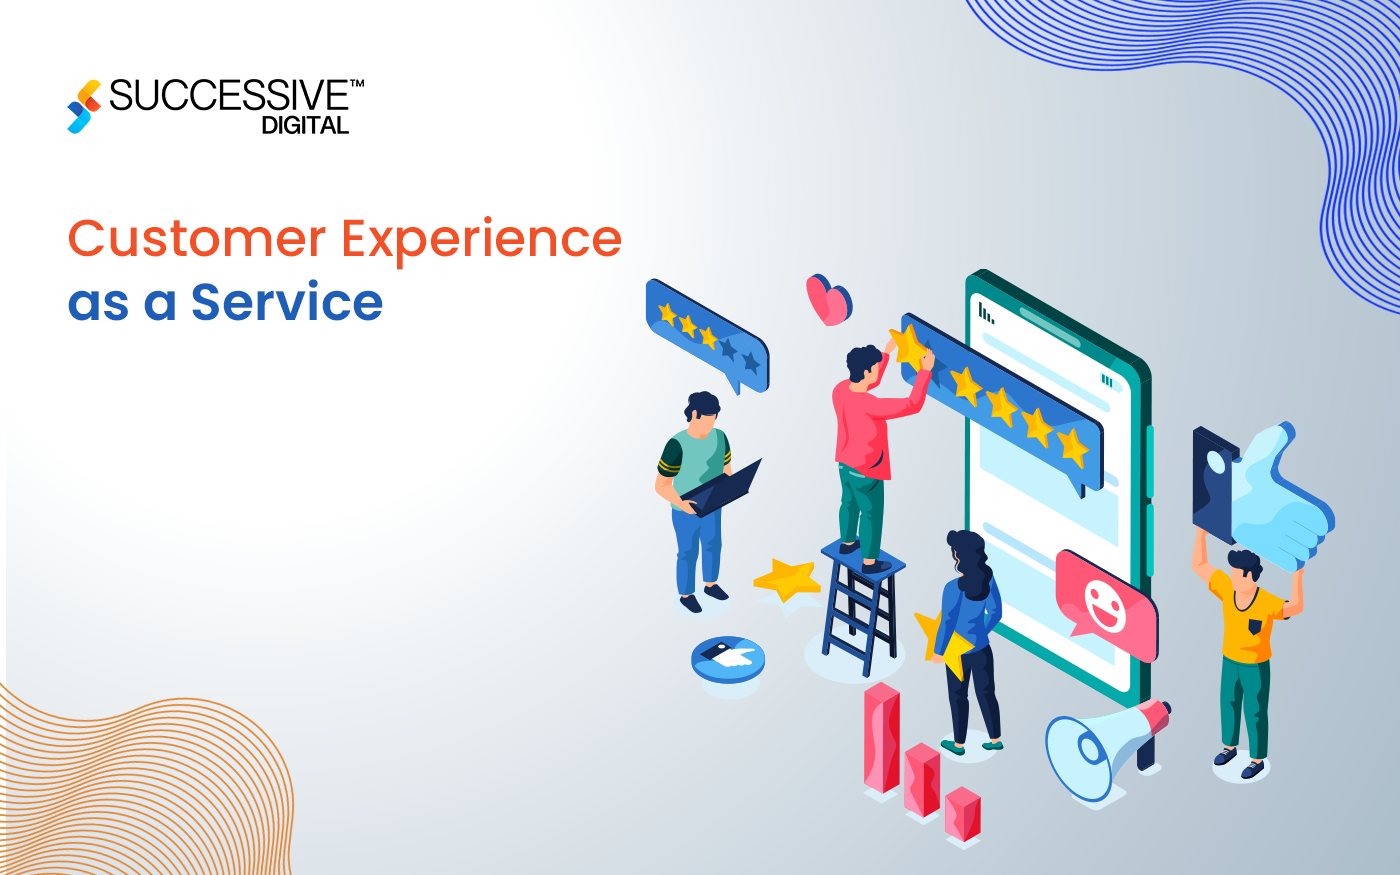 Customer Experience as a Service